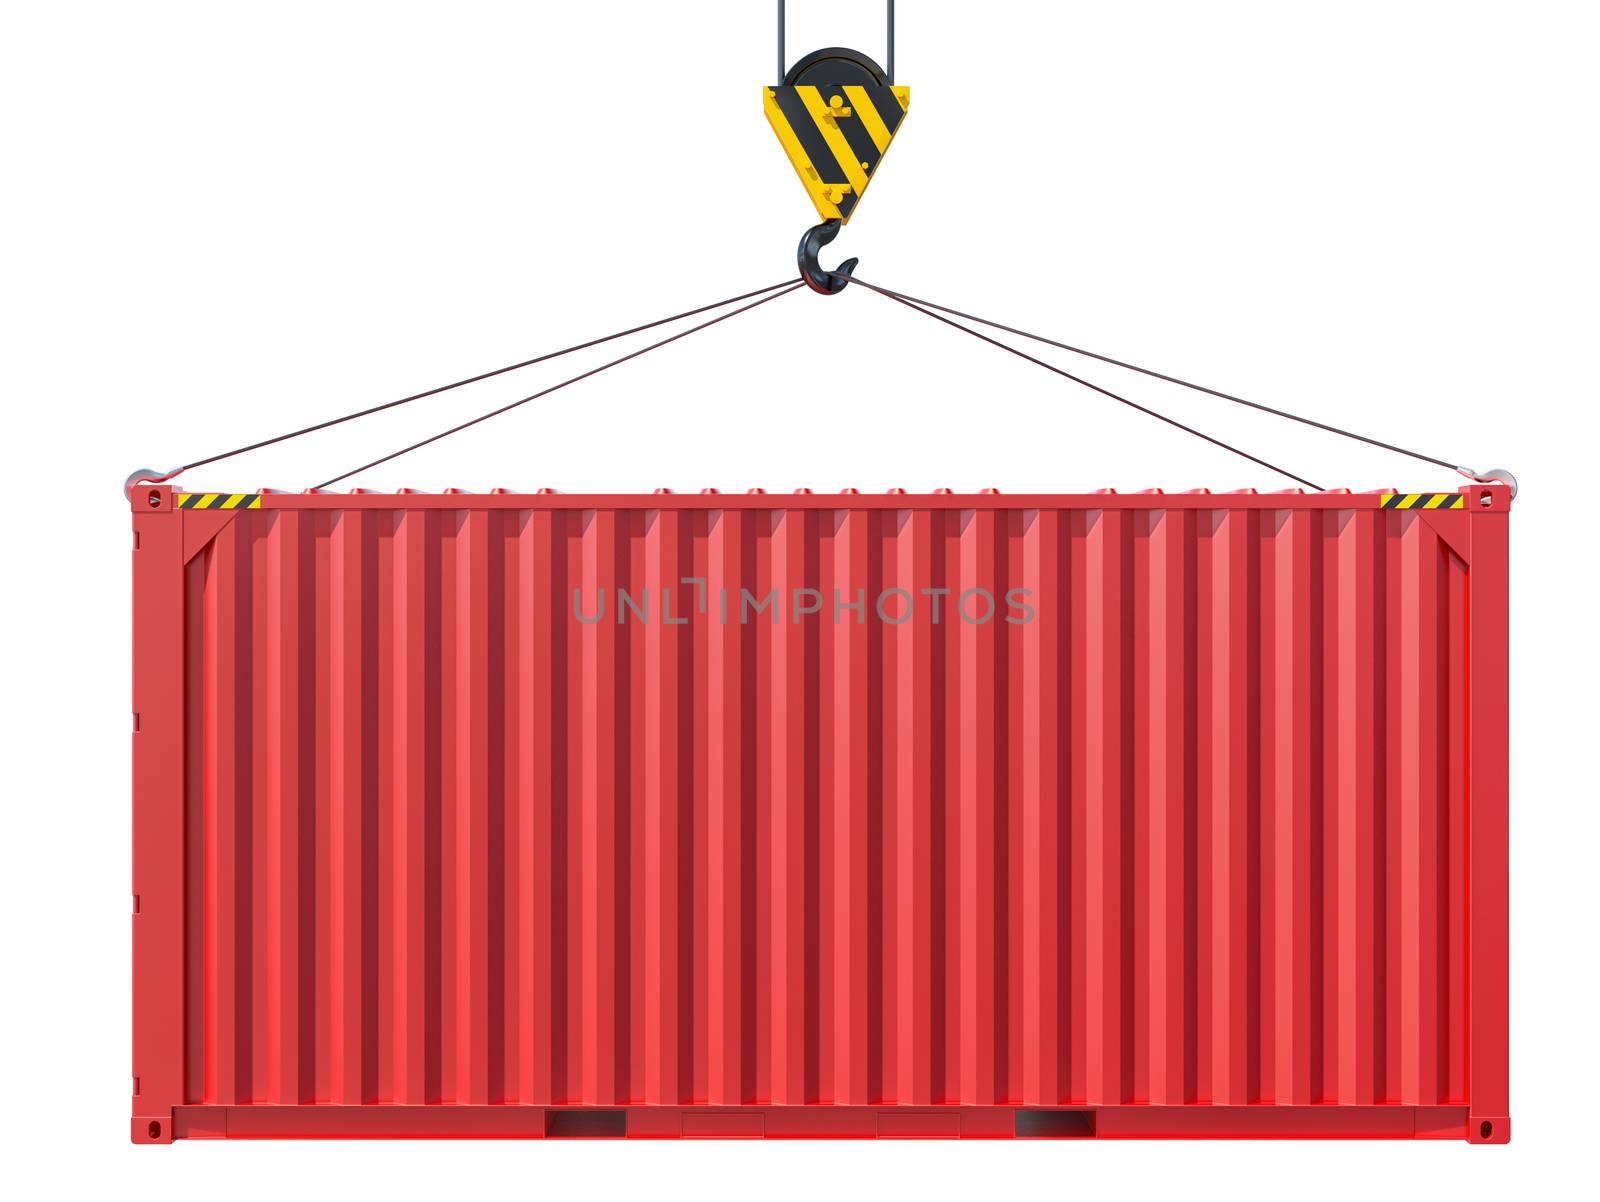 Crane hook lifts metal container. Isolated on white background. 3D rendering